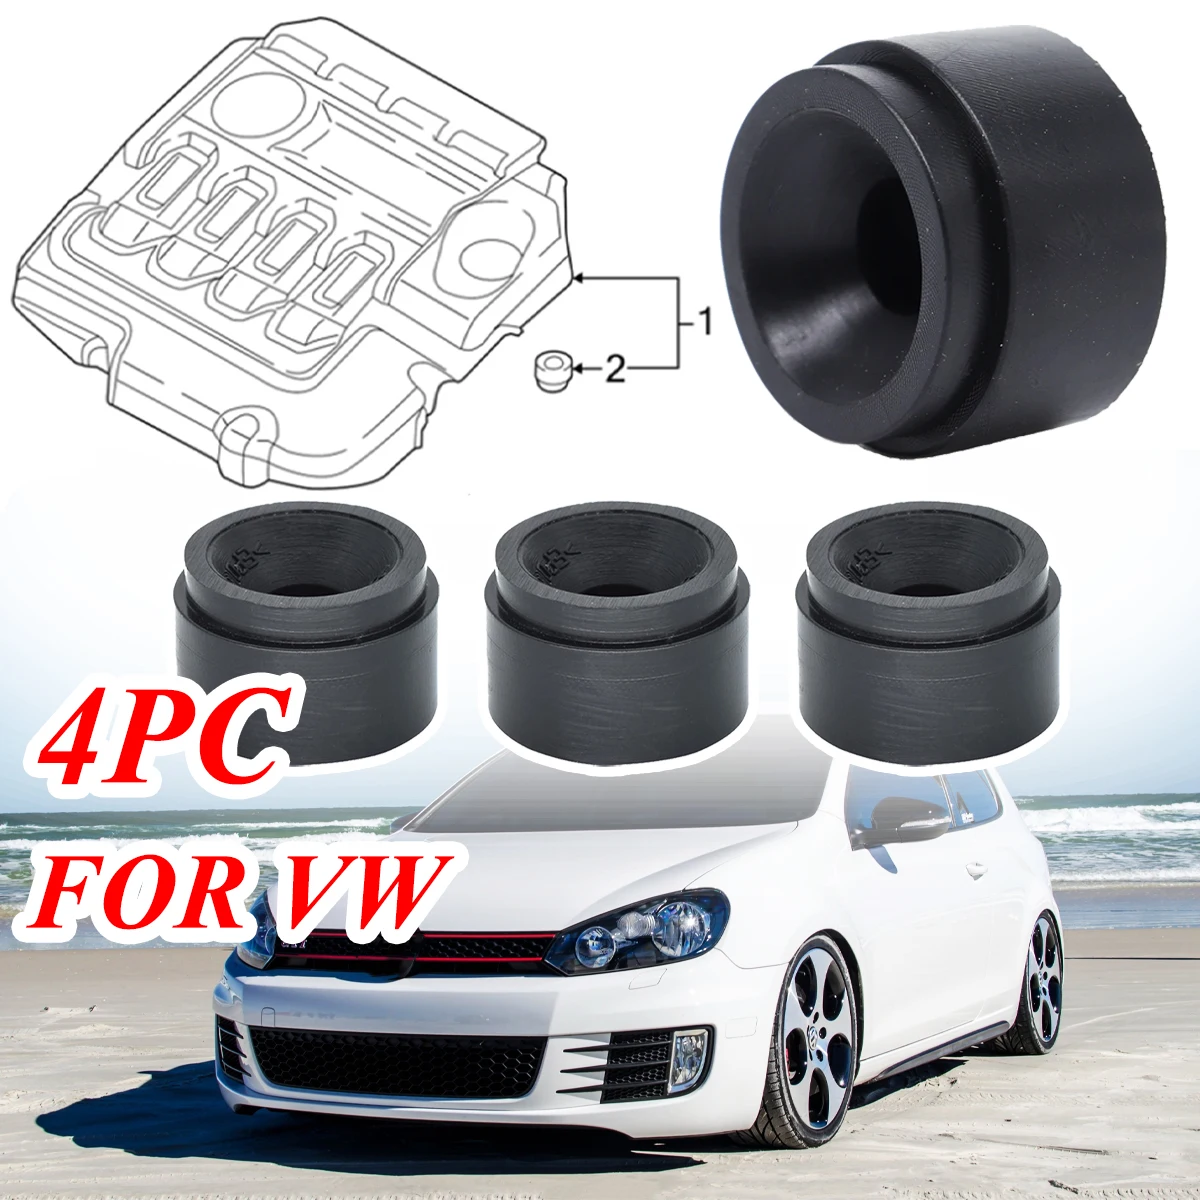 

4X Engine Rubber Mounting Bush For VW Golf TDI MK6 Jetta Protective Under Guard Plate Clip Grommet Support Bungs Black Car Parts